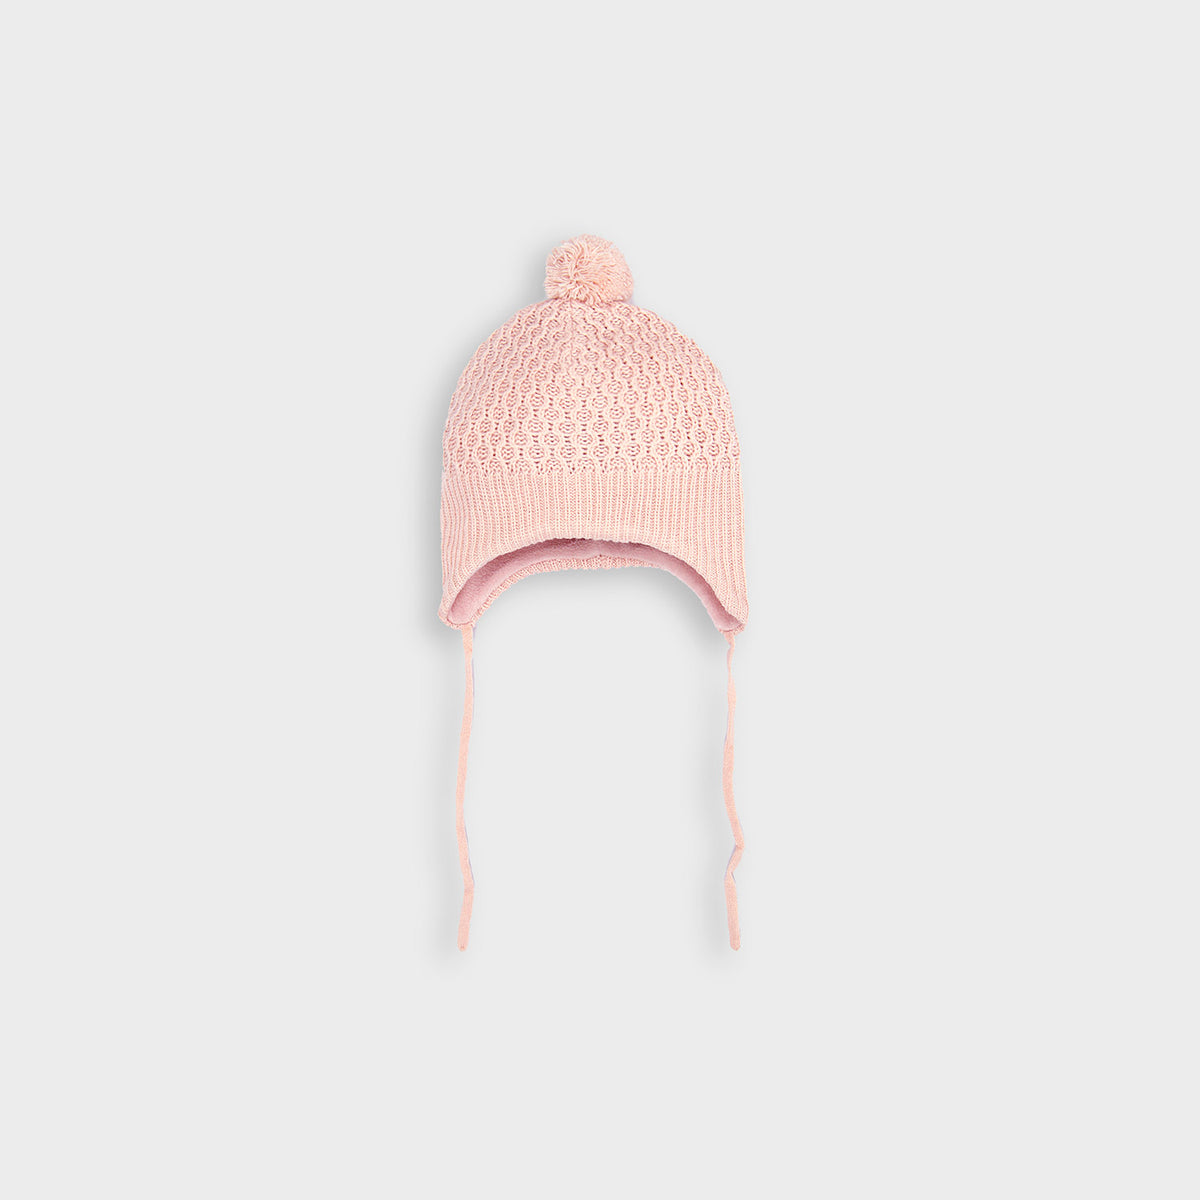 Imported Soft Knit Fleece-Lined Cap For Kids